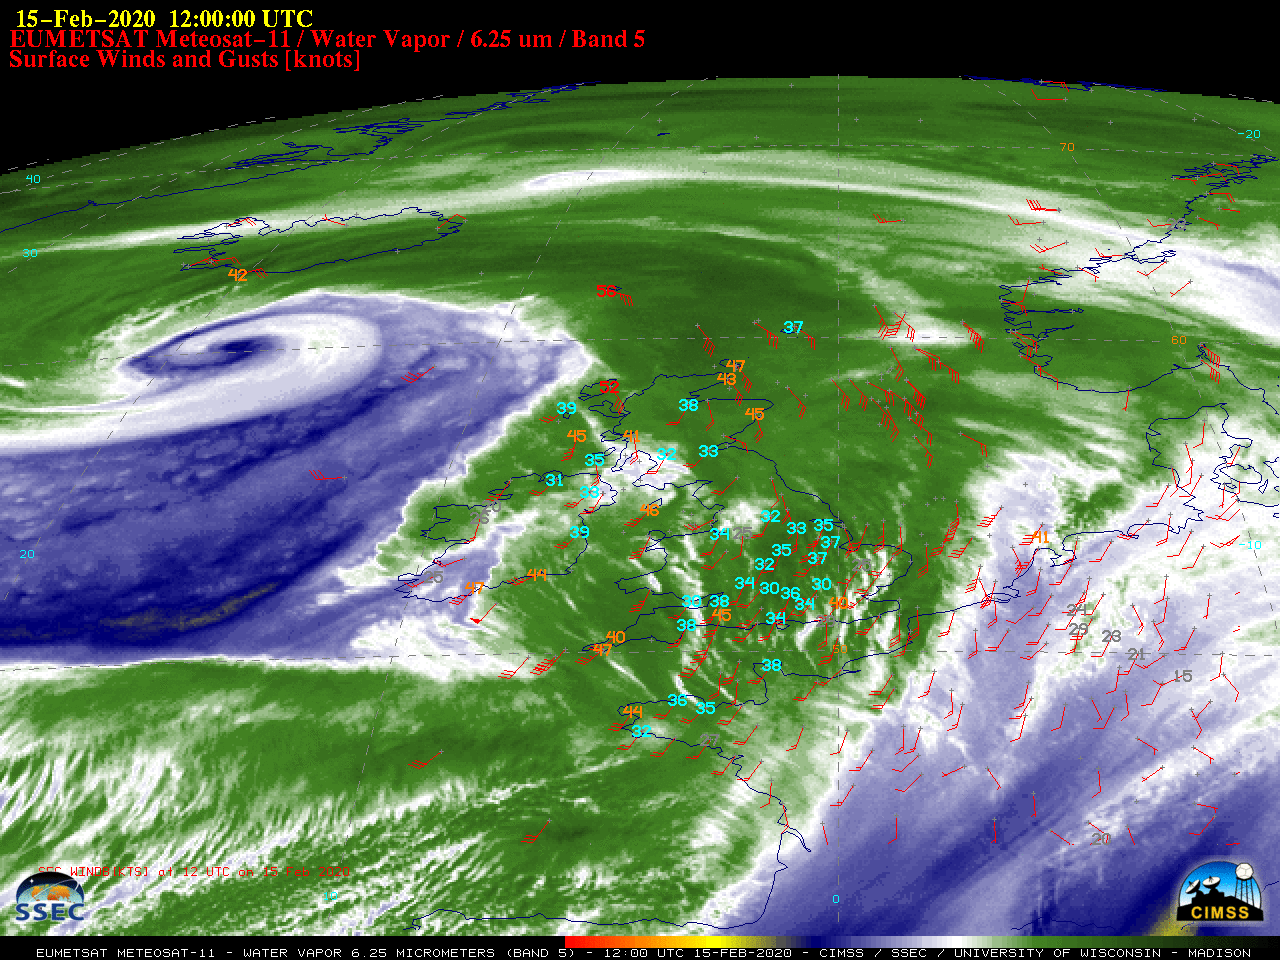 Meteosat-11 Water Vapor (6.25 µm) images, with hourly wind barbs and gusts (in knots) [click to play animation | MP4]